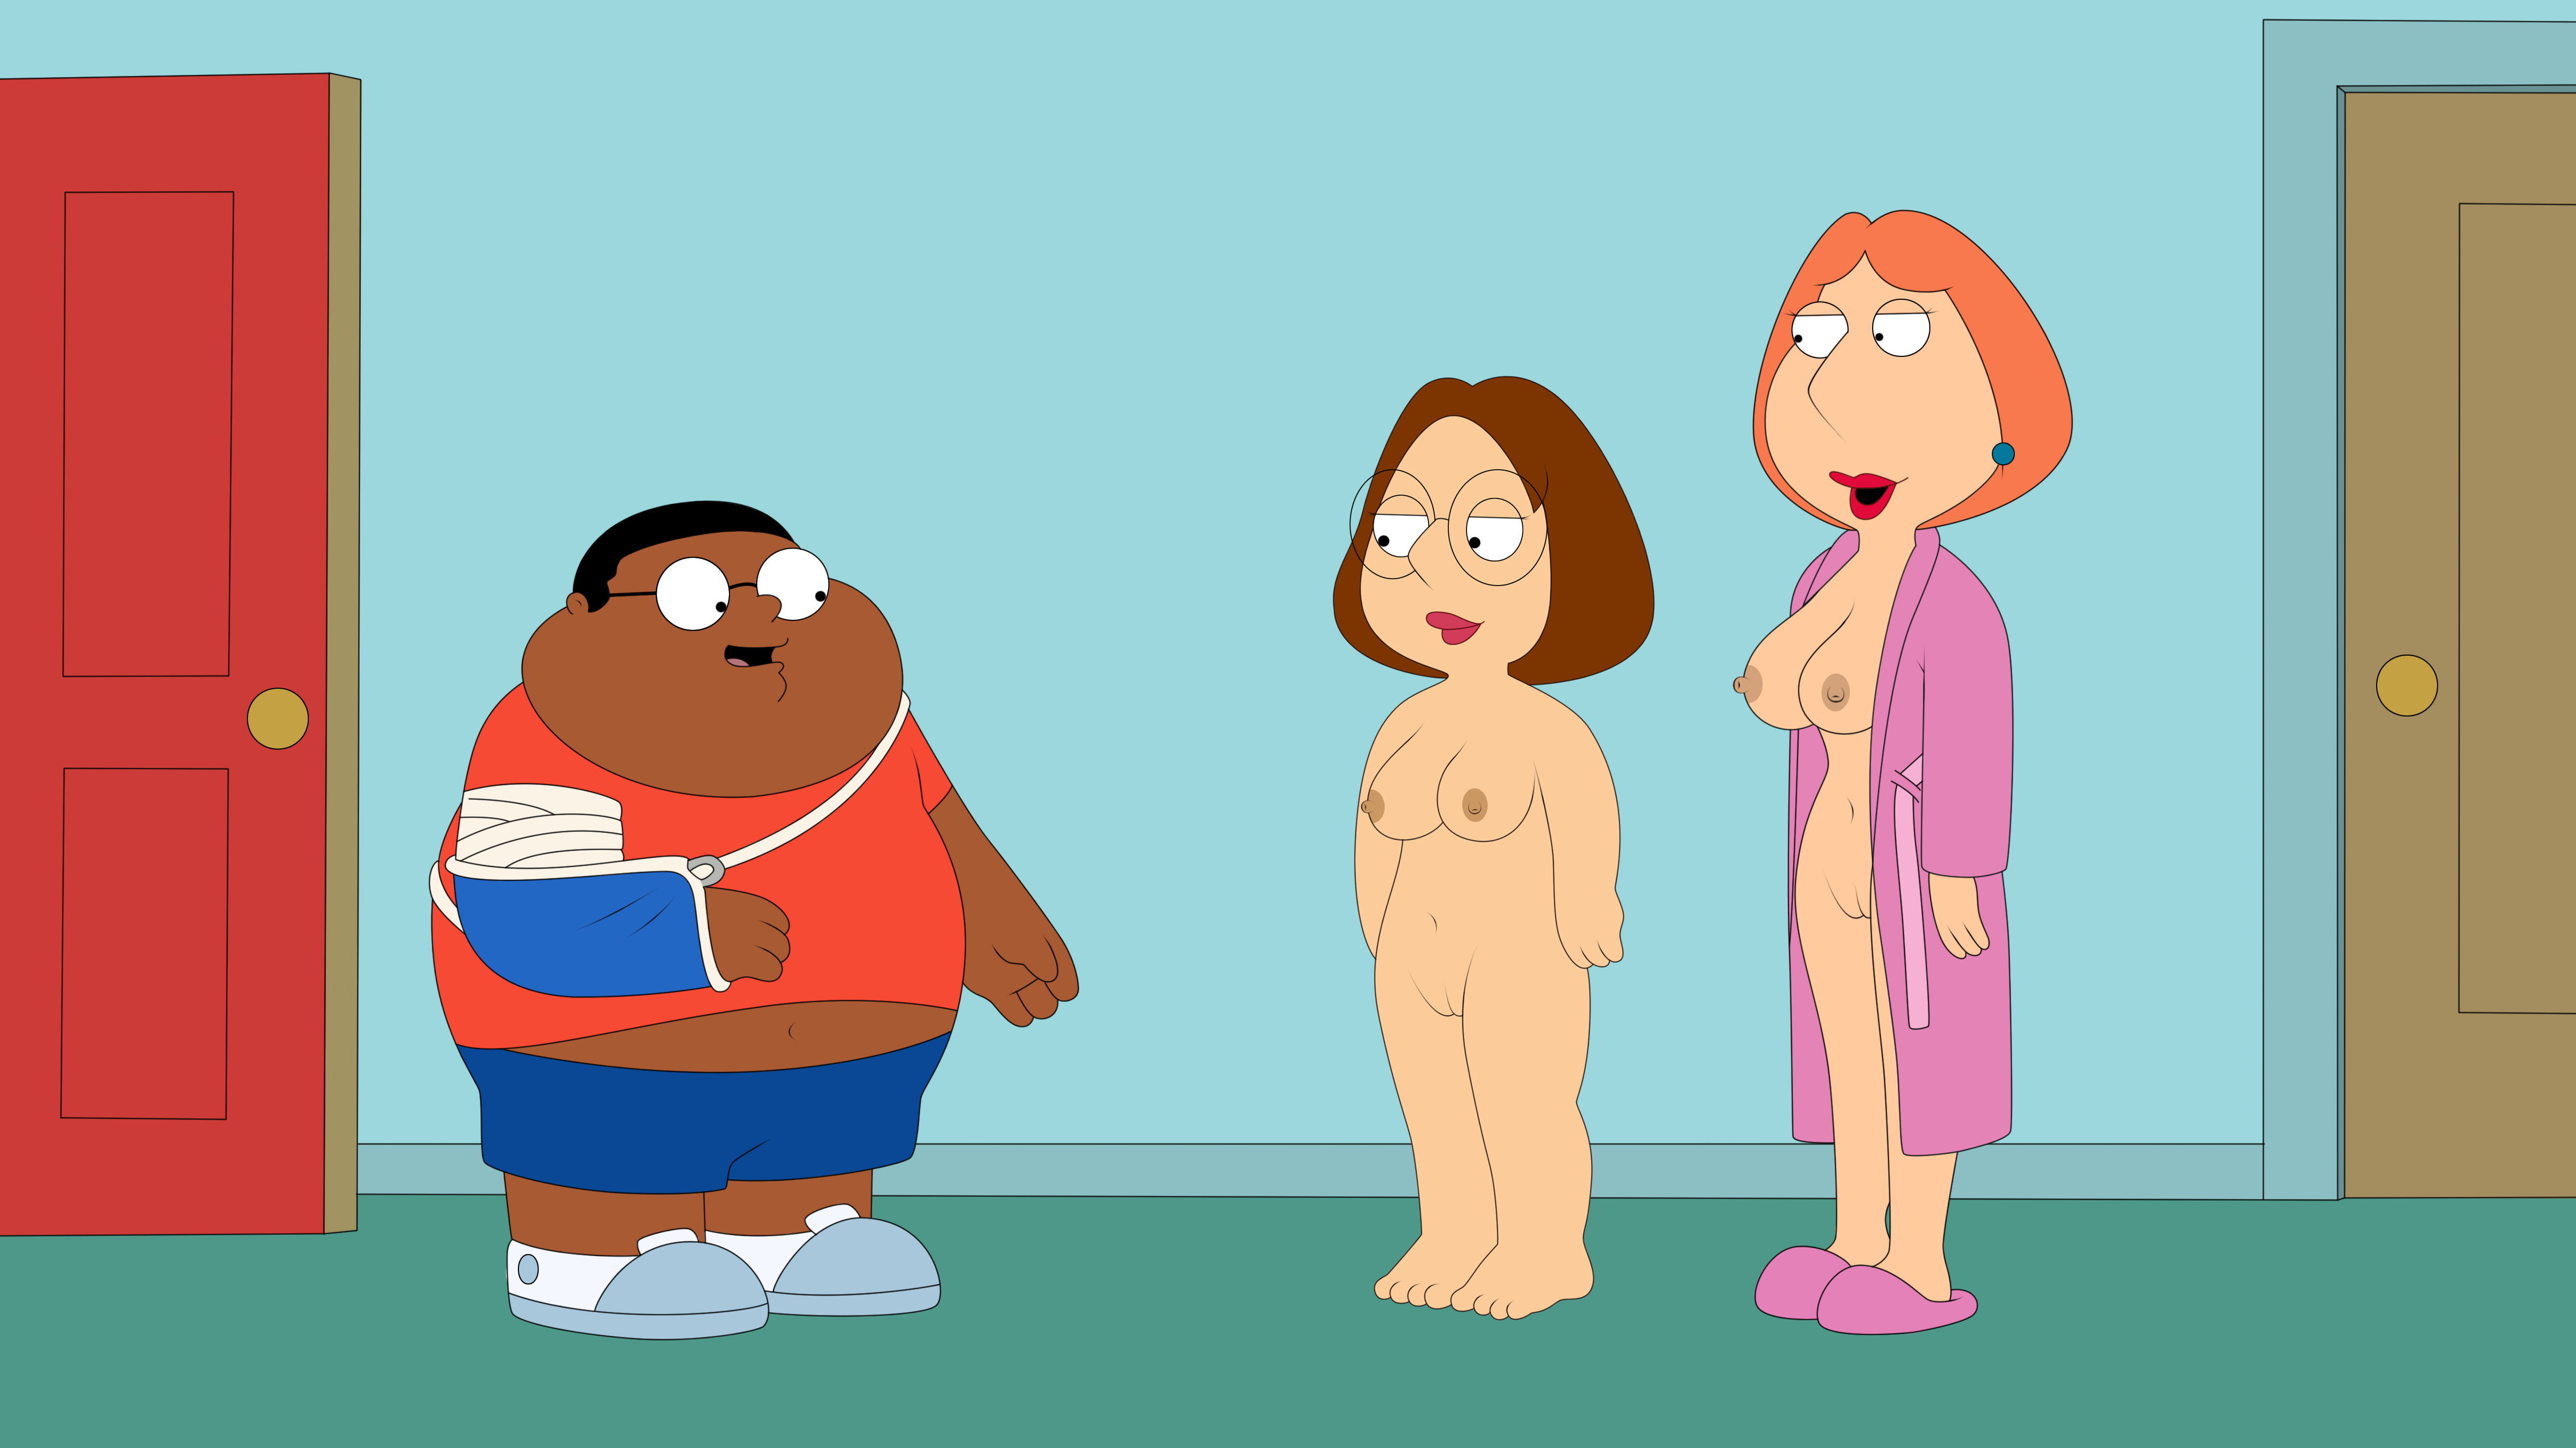 Peter And Lois Naked Having Sex.